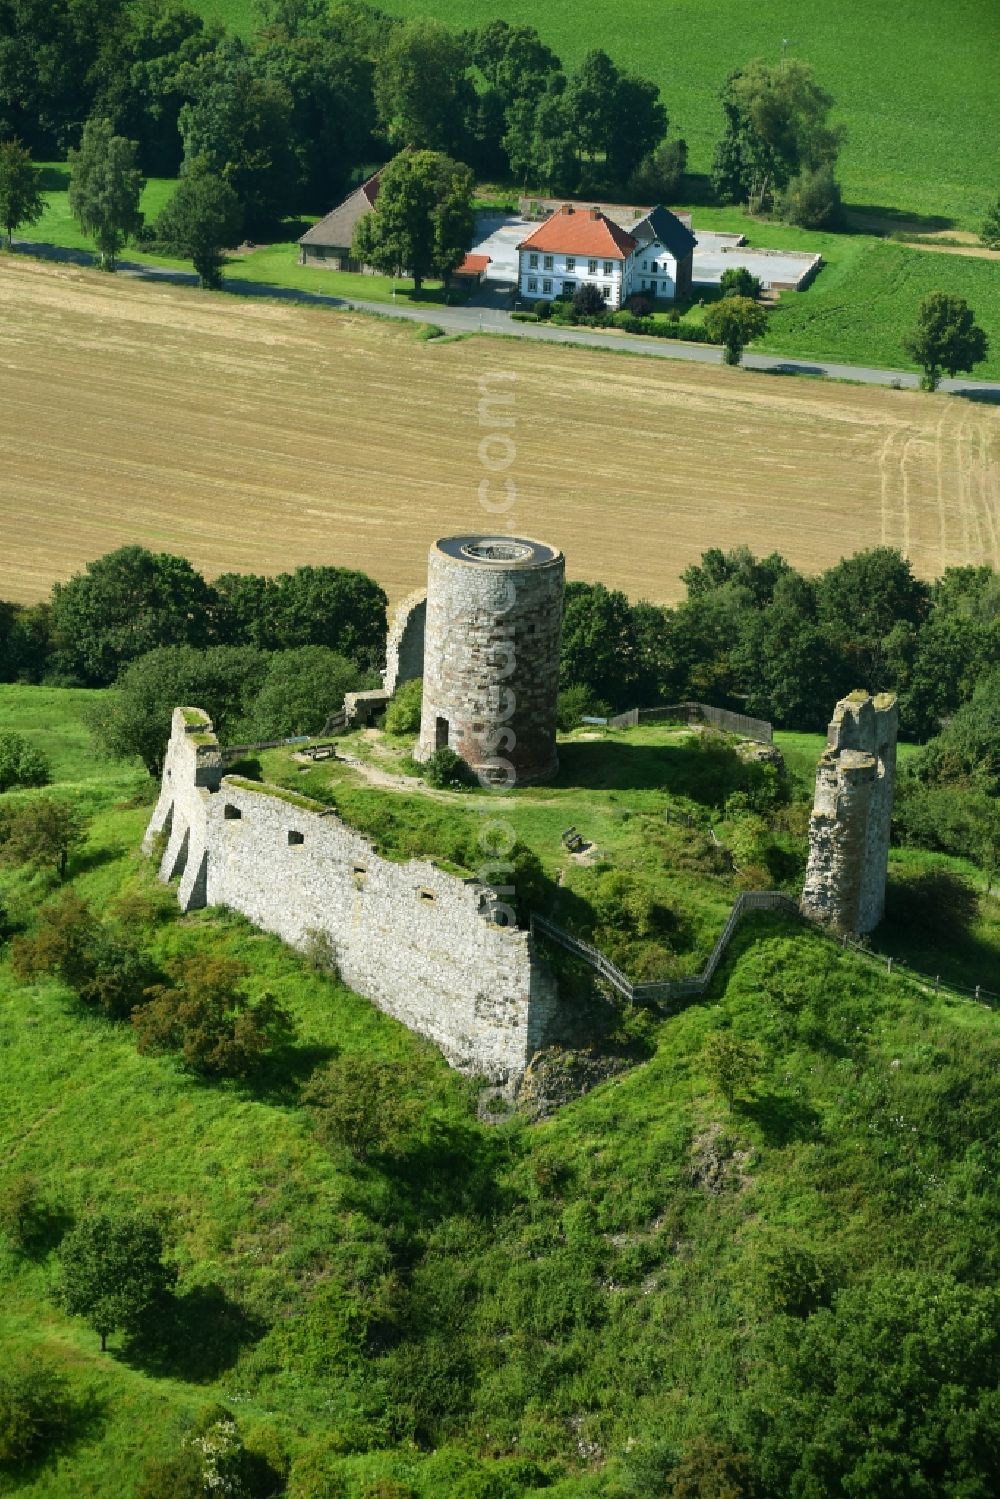 Warburg from the bird's eye view: Ruins and vestiges of the former castle and fortress Burgruine Desenberg in Warburg in the state North Rhine-Westphalia, Germany